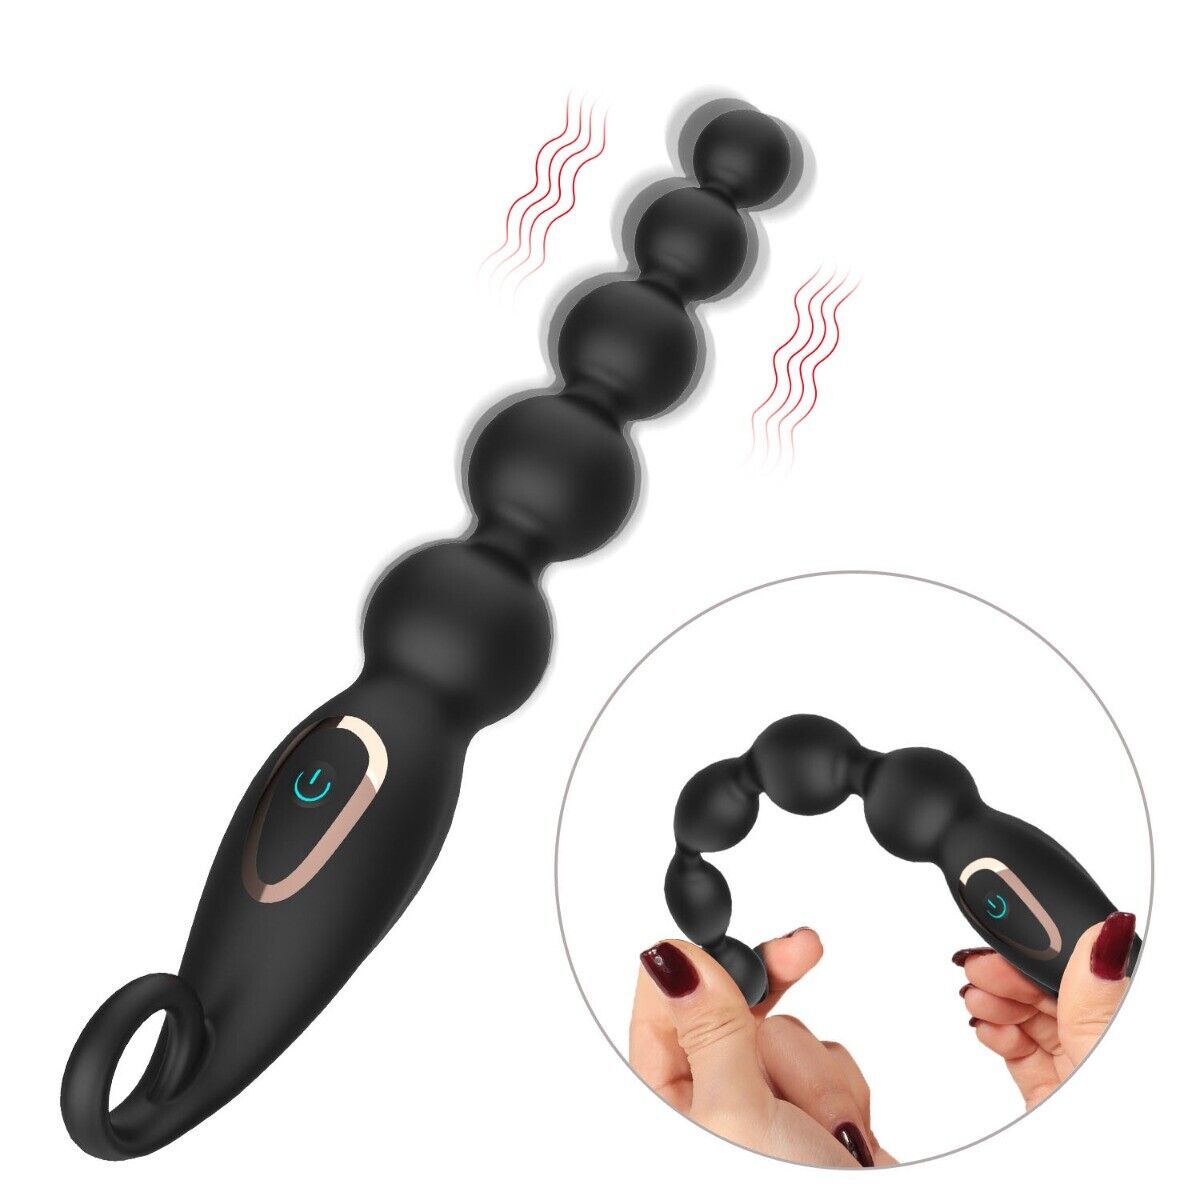 Silicone Vibrating Anal Beads Butt Plug Vibrator Sex Toys for Men Women Couples